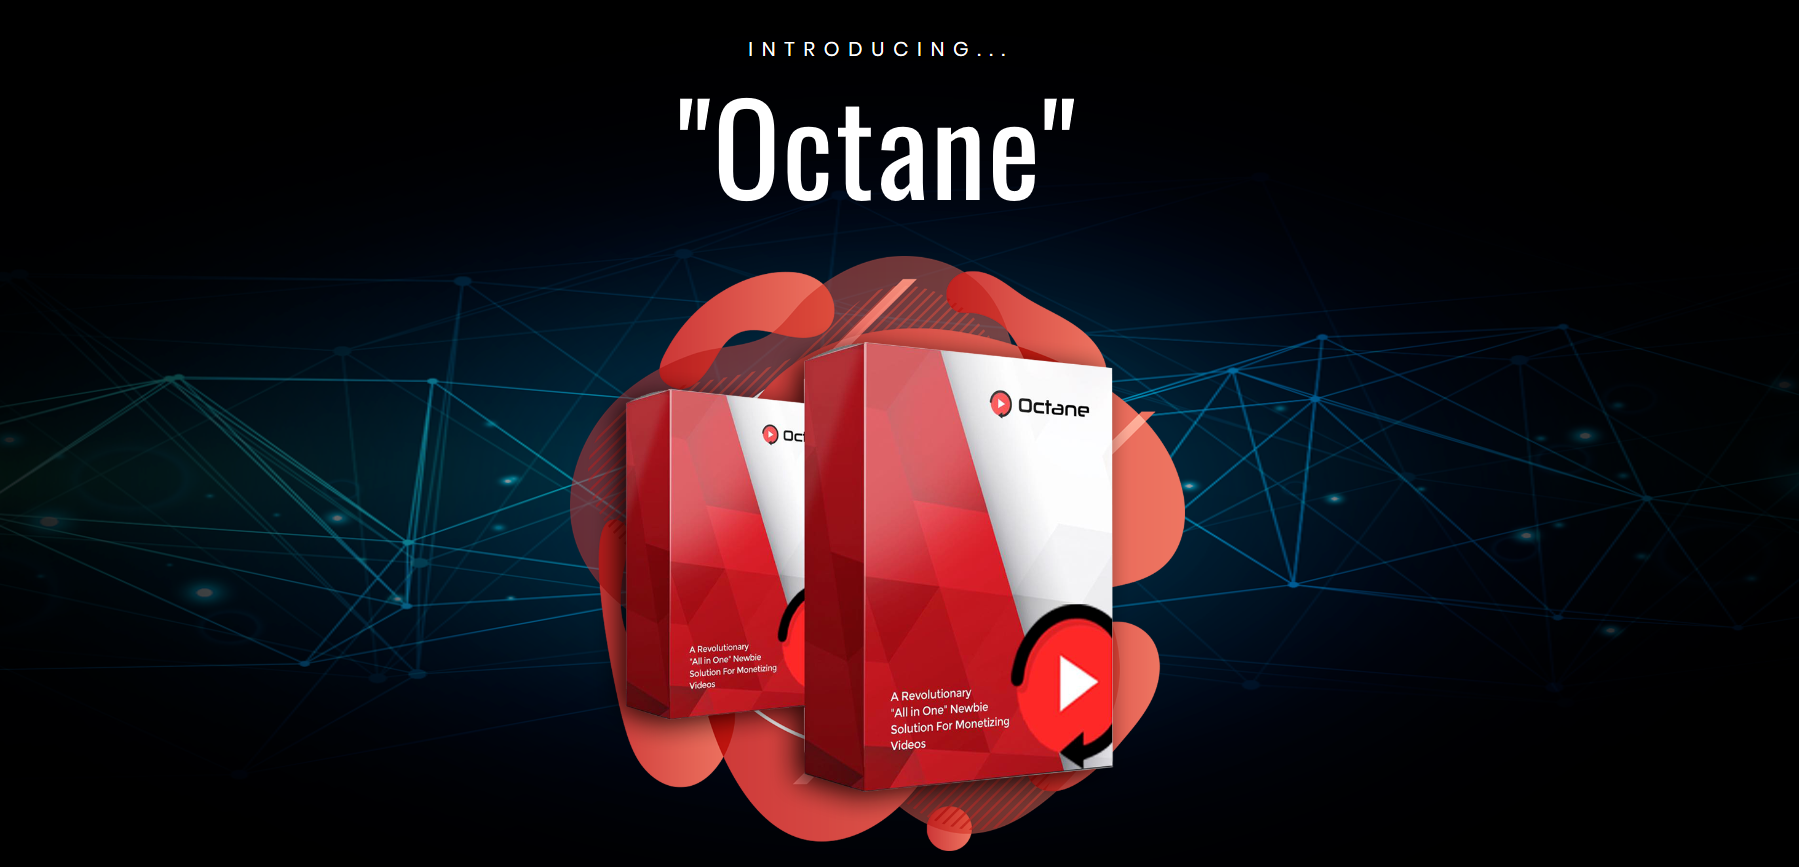 While it is illegal to guarantee results, we can legally say with certainty, the Octane system has been proven to get fast results from REAL USERS just like you. Because what Octane creates is a REAL business. Imagine an automated source of passive income within 30 minutes of getting inside the member’s area. Yes, you’re just “3 clicks” away from an Octane system.